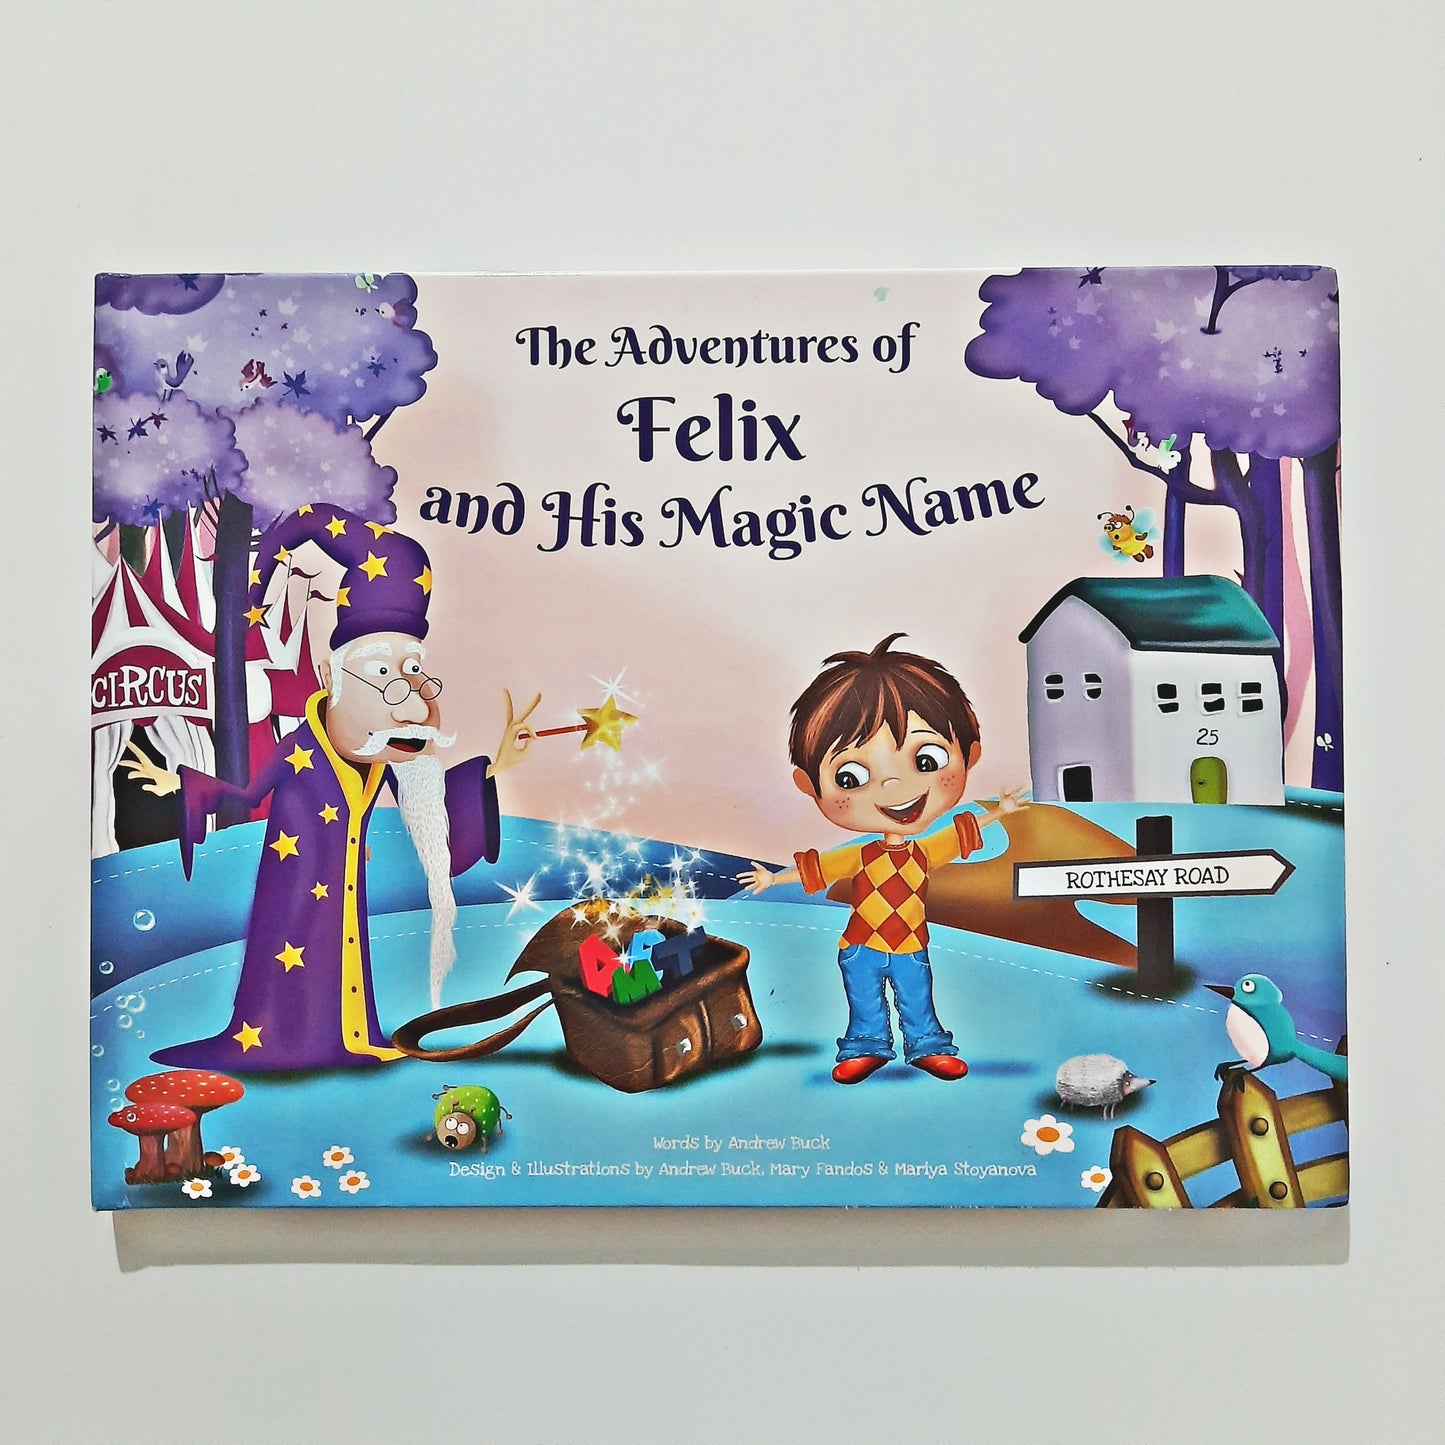 The Adventure of Felix and his Magic Name